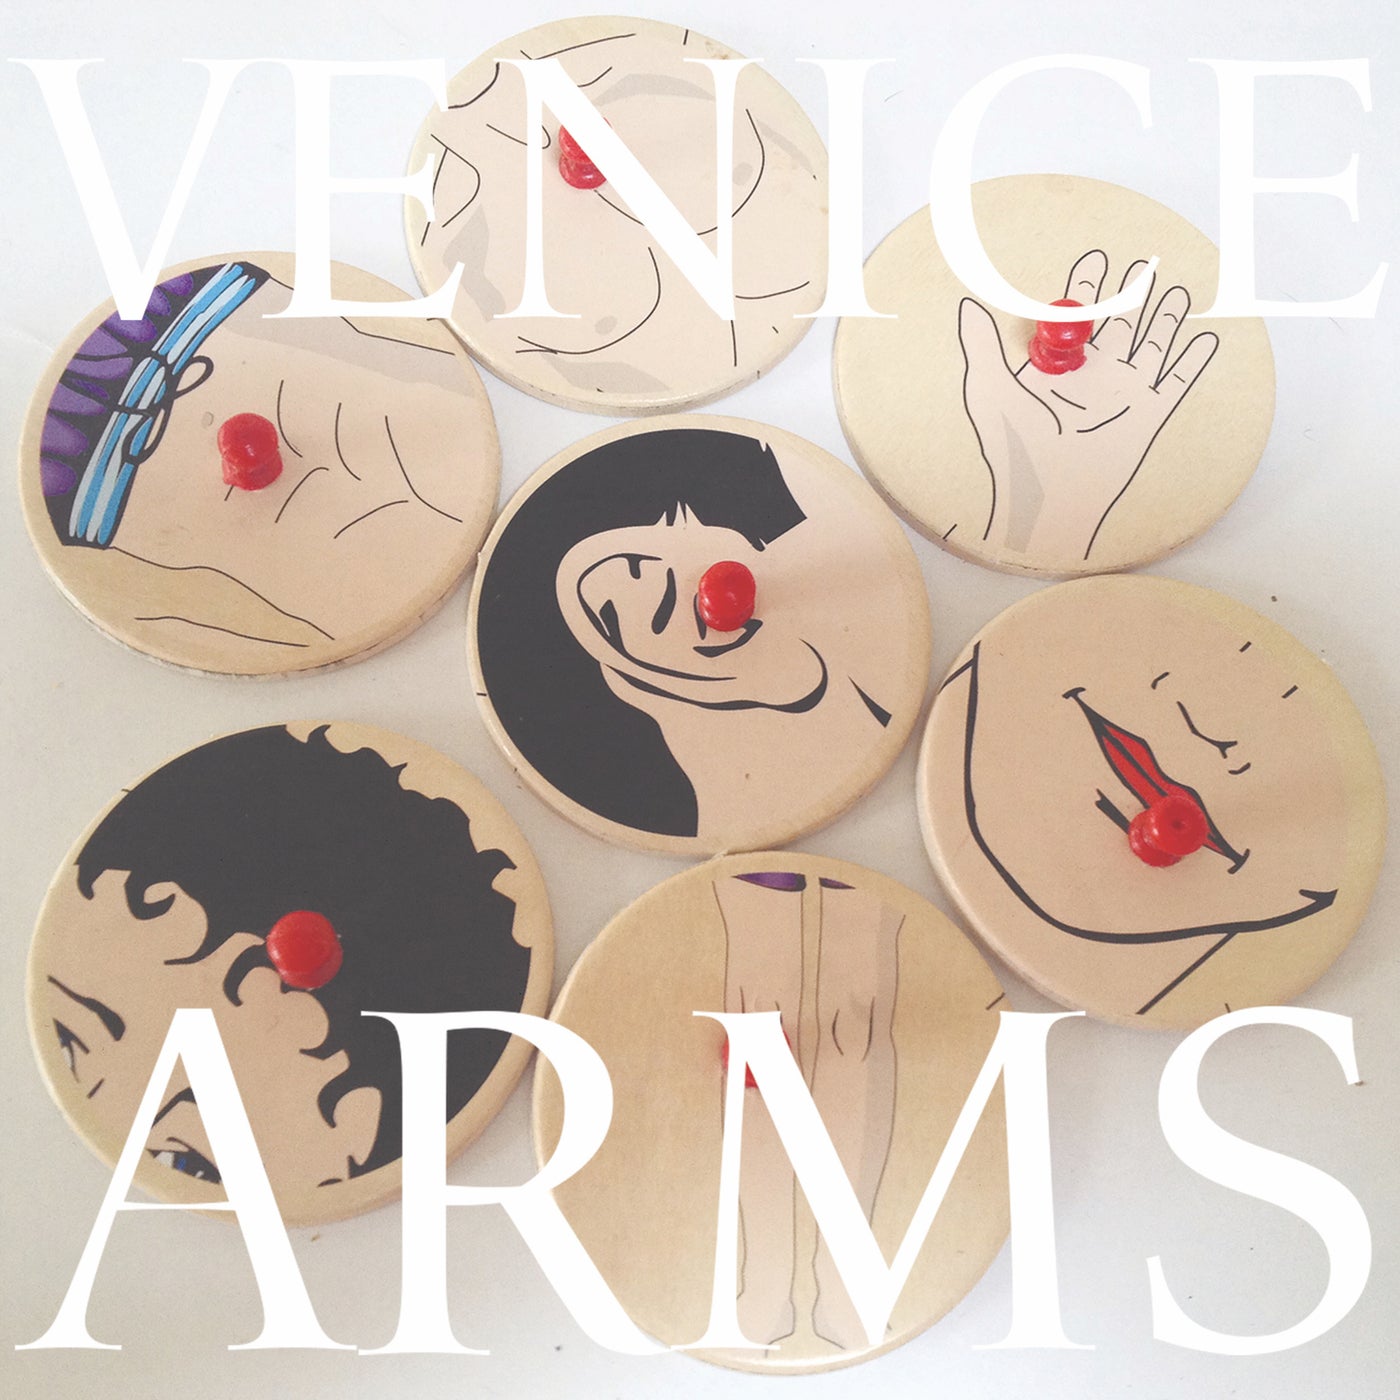 Venice Arms – The Future Is Waiting [PERMVAC2131]